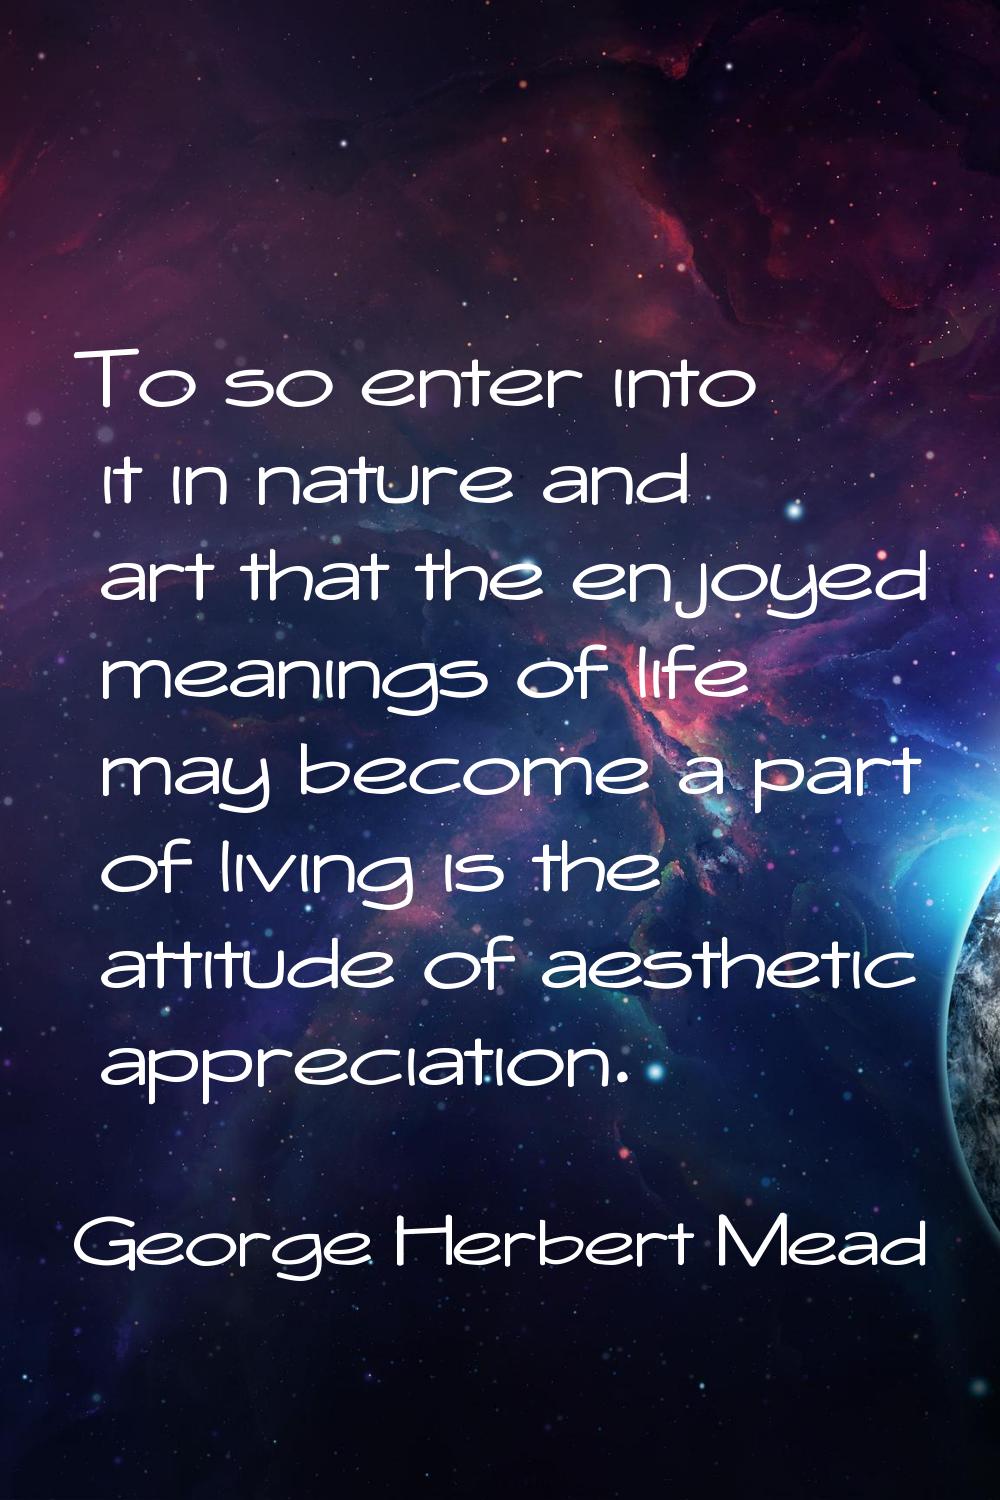 To so enter into it in nature and art that the enjoyed meanings of life may become a part of living